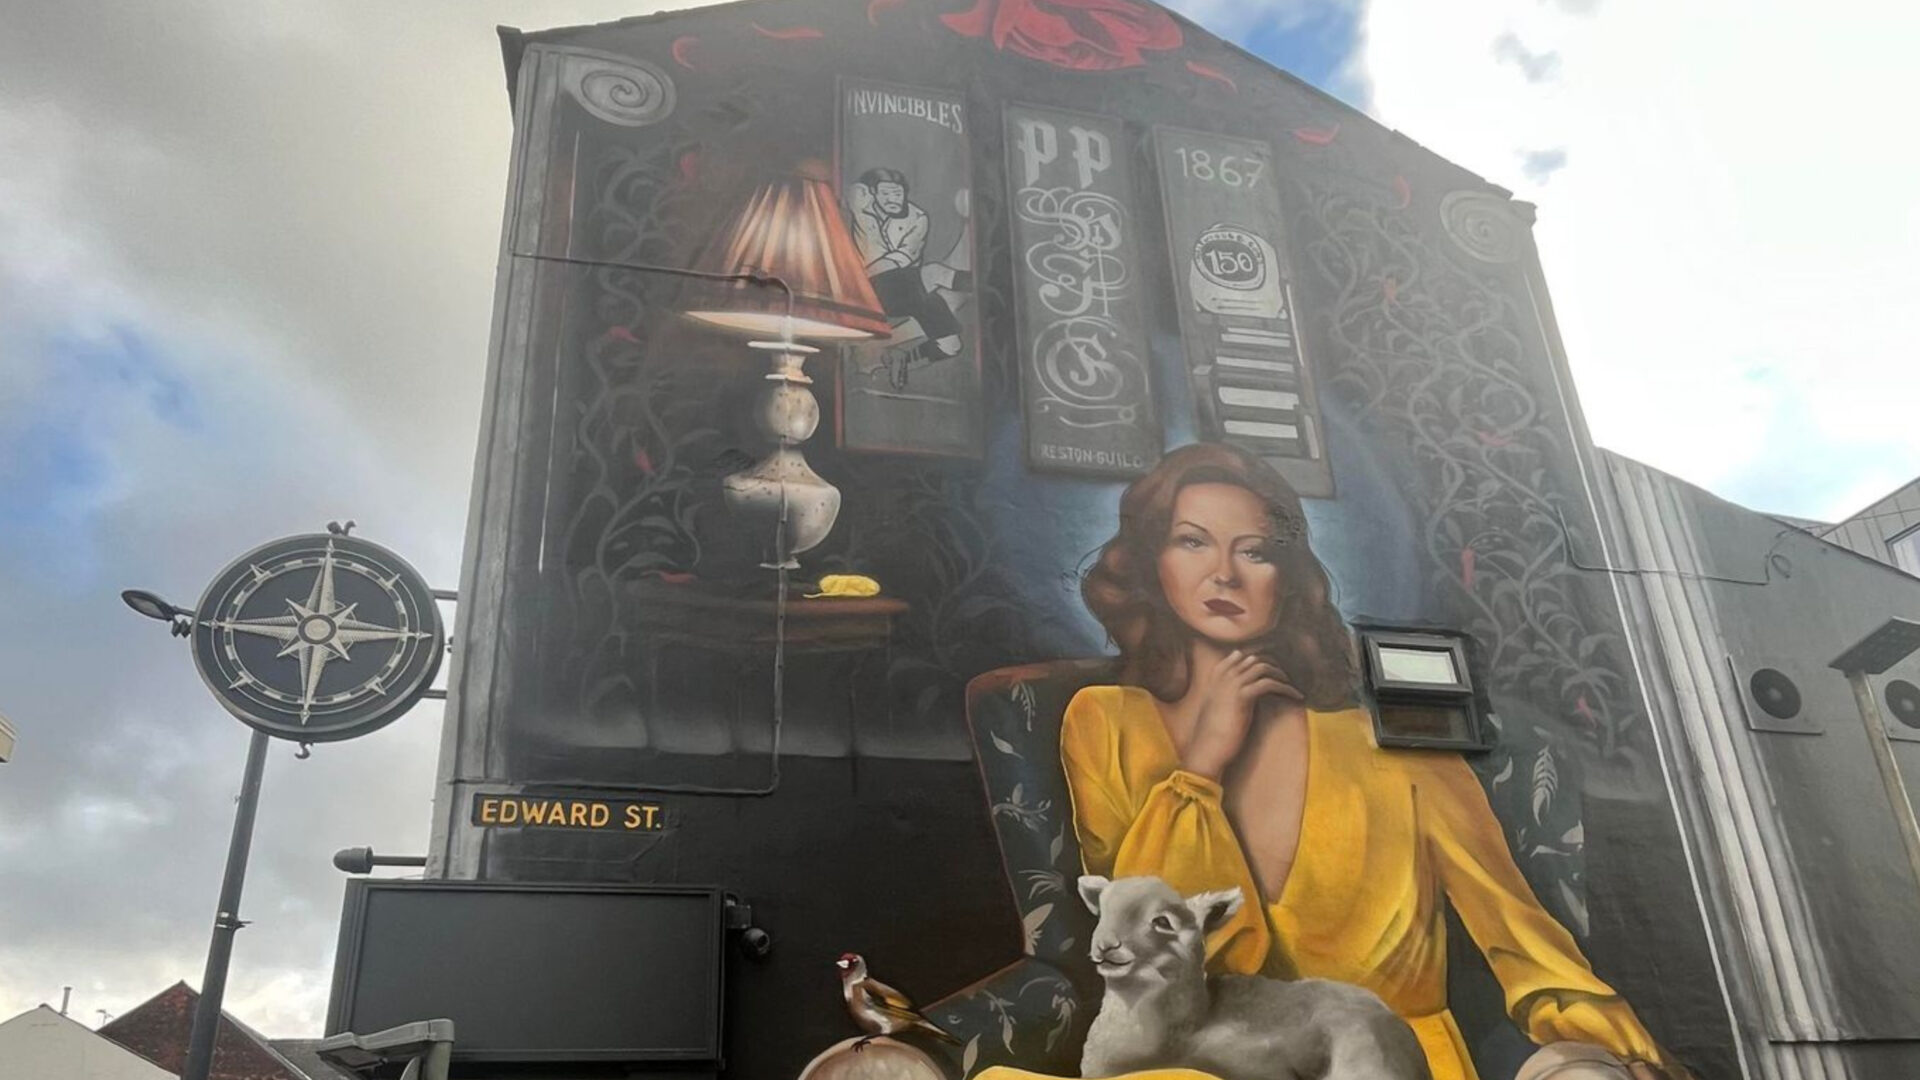 Image of a large street artwork of a woman in a yellow dress